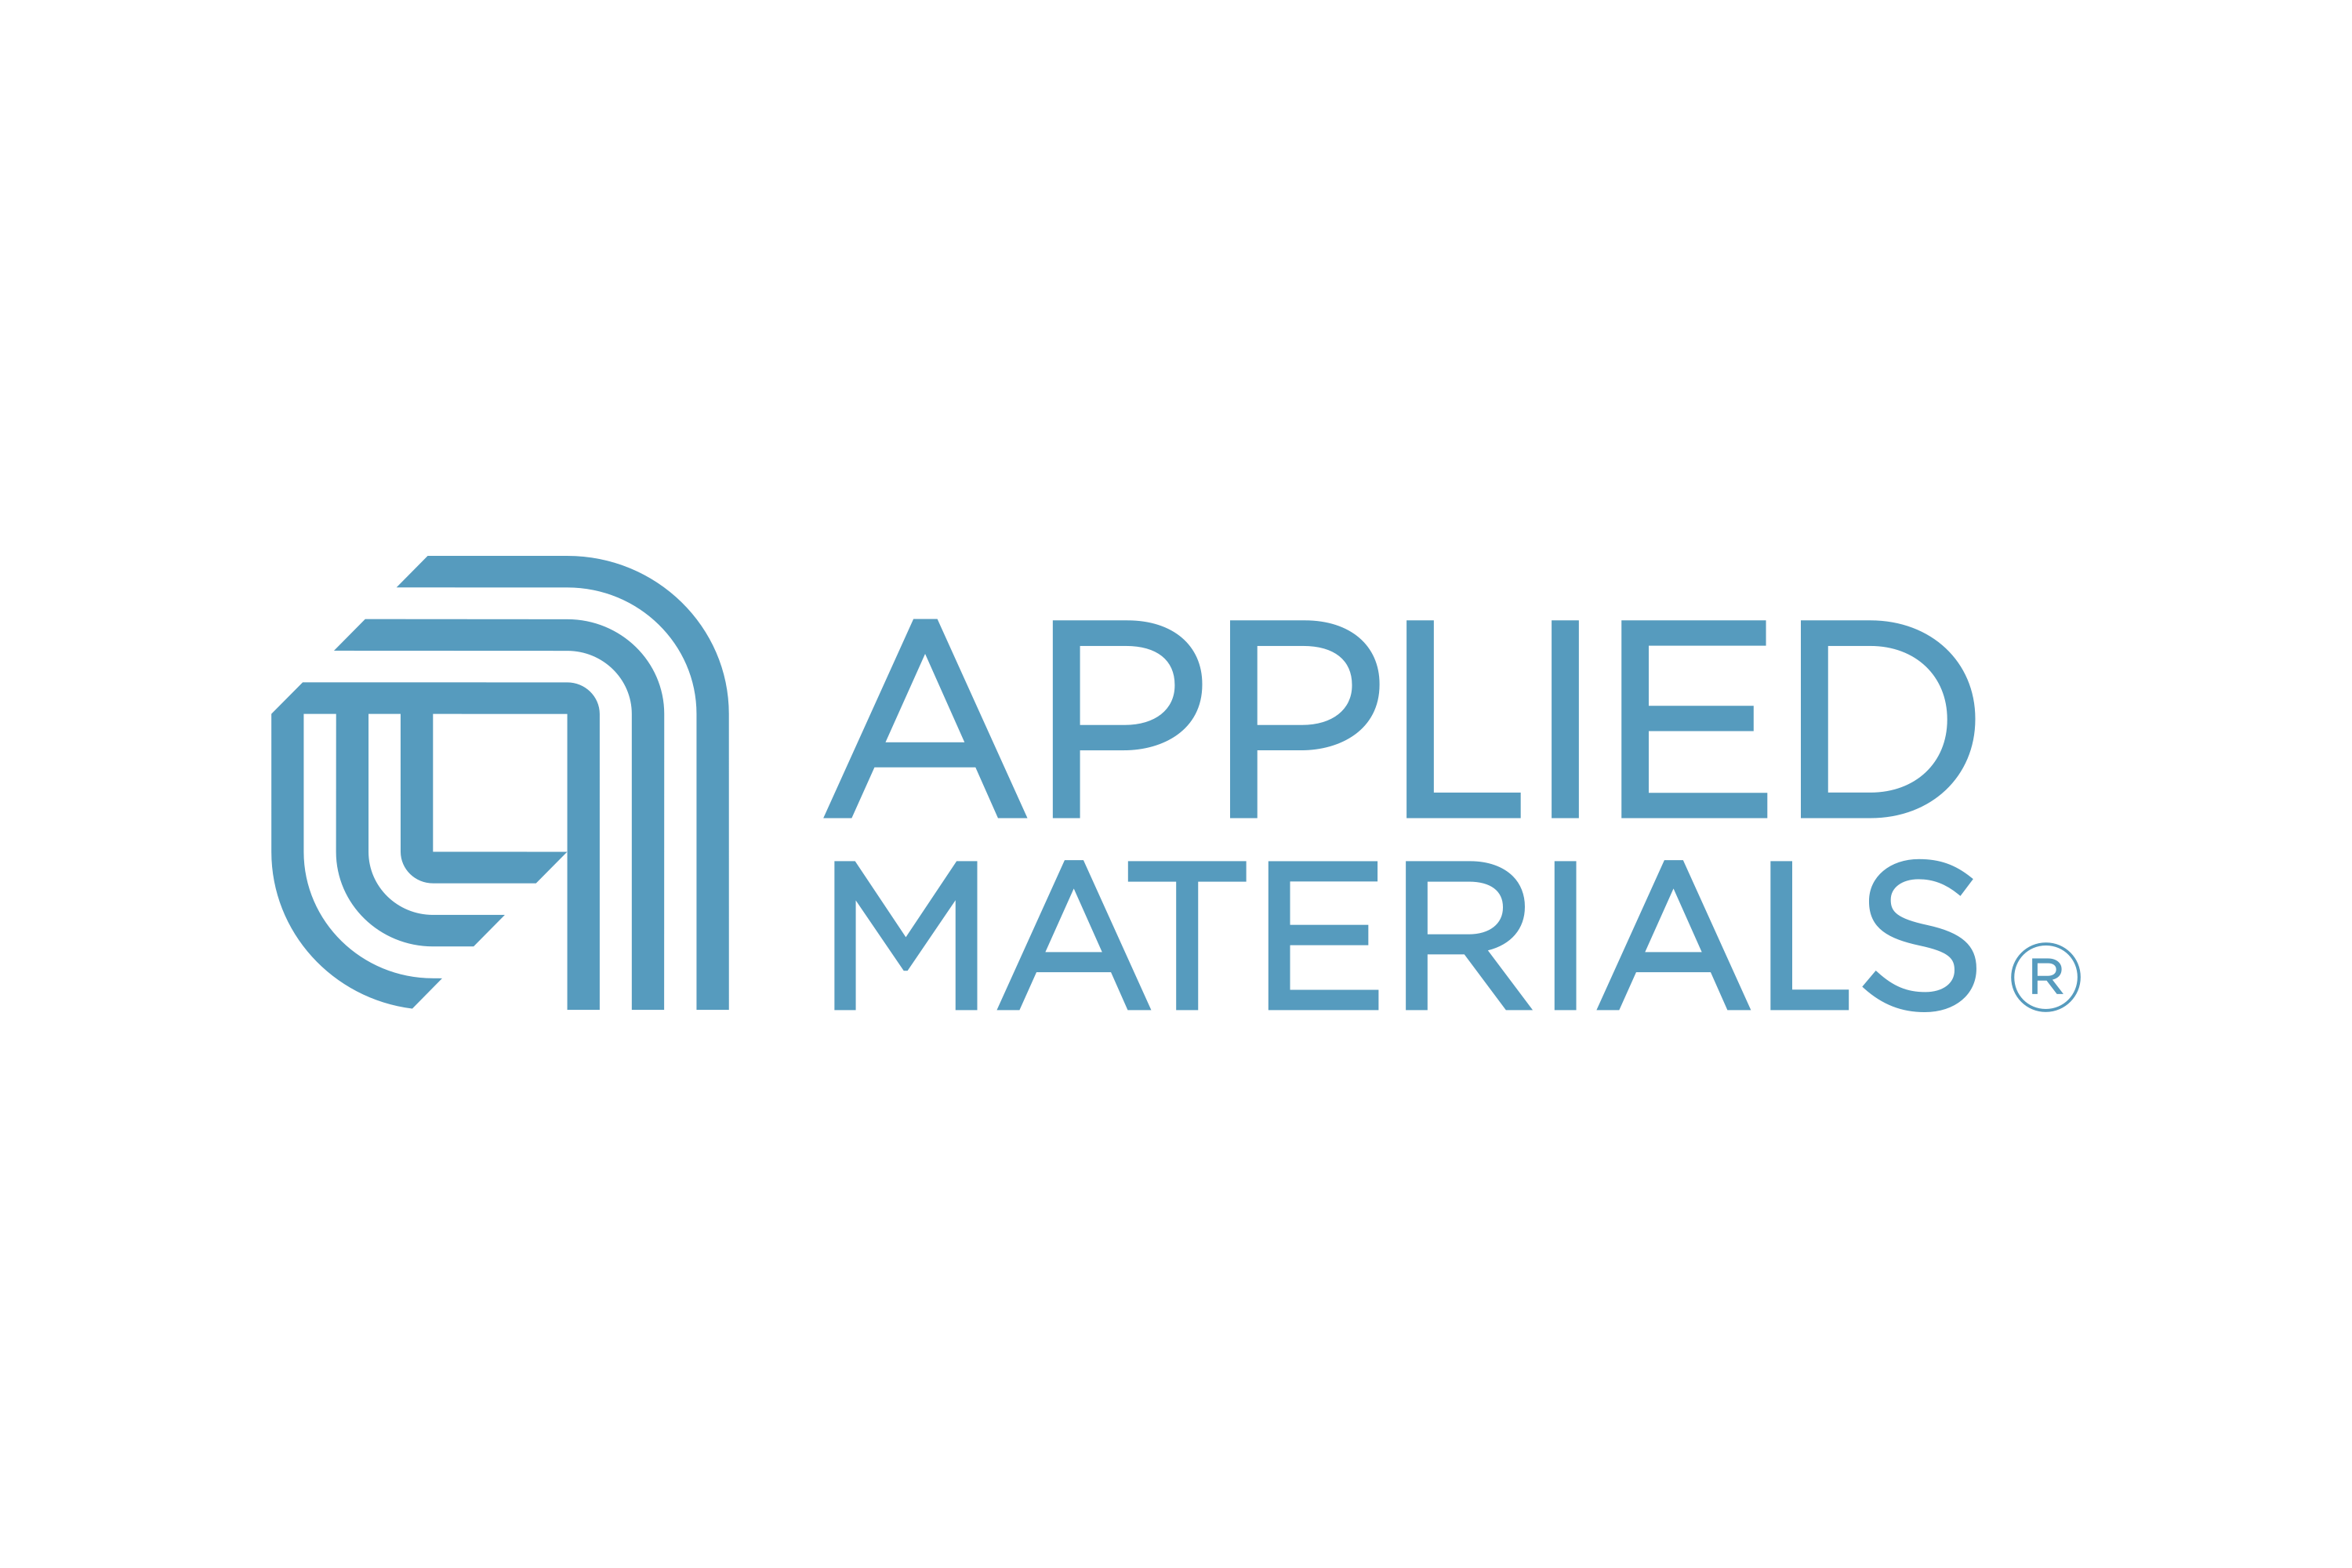 Download Applied Materials Logo in SVG Vector or PNG File Format - Logo.wine